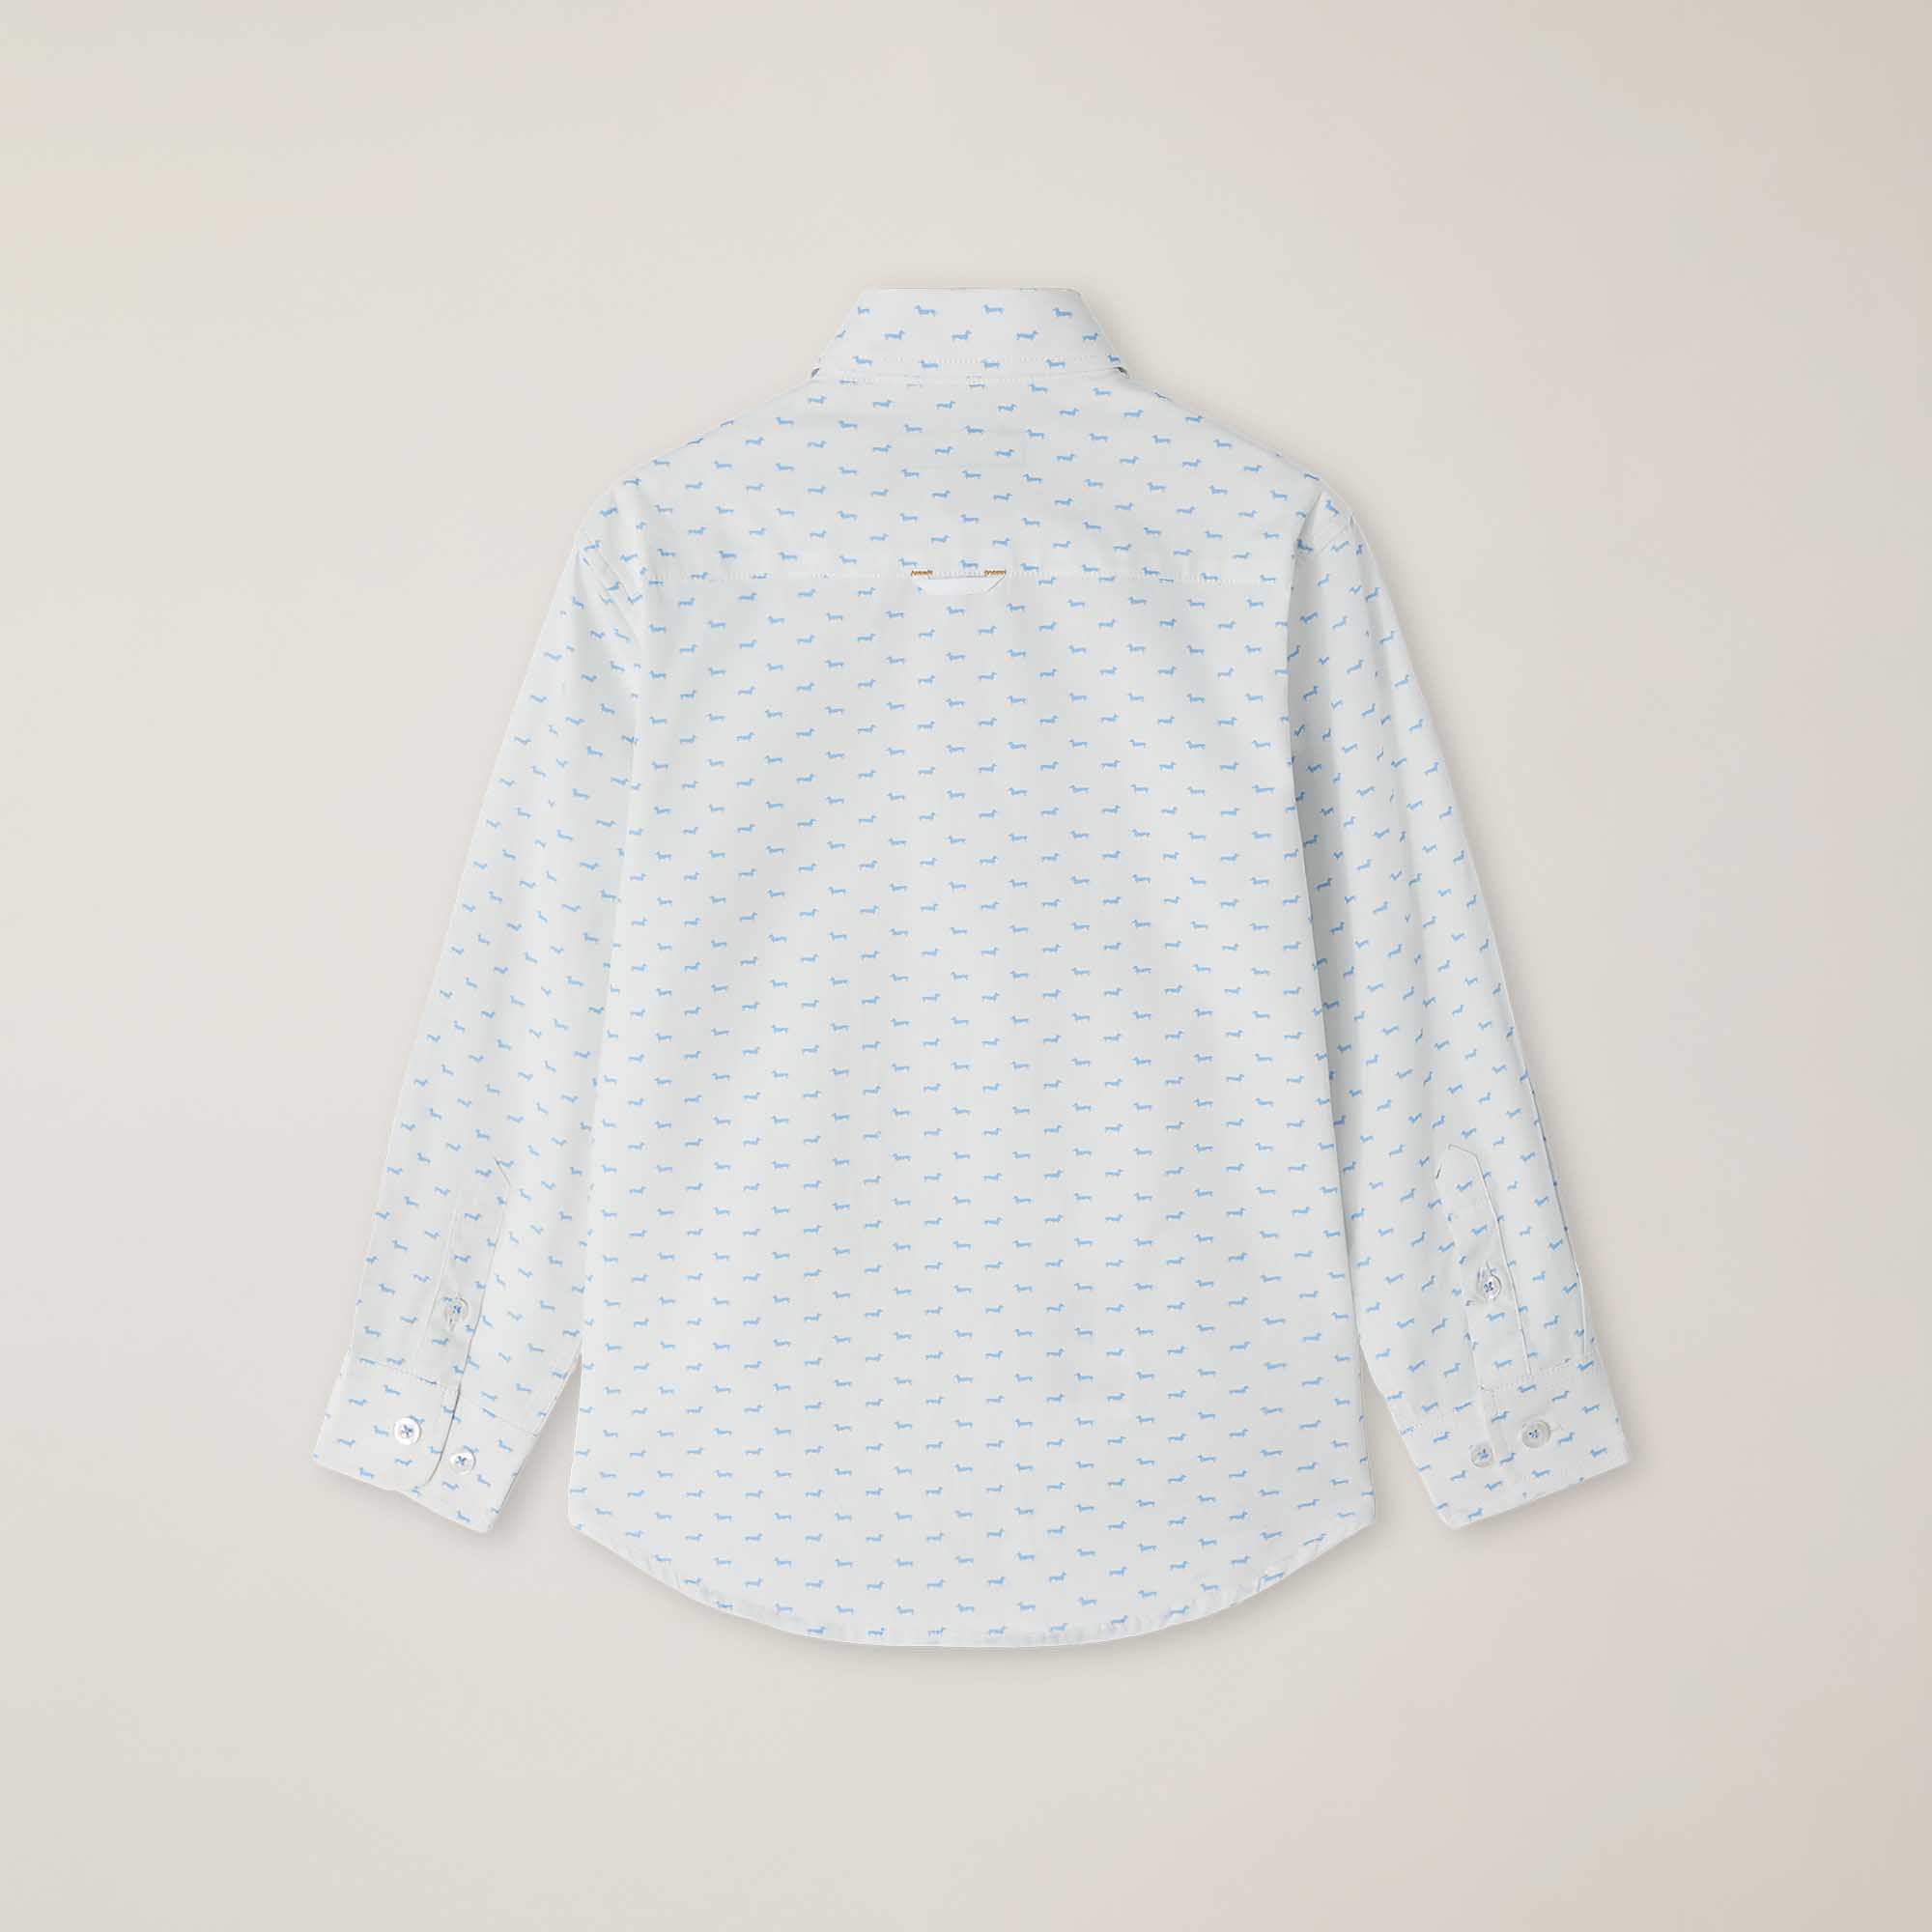 Poplin shirt with Dachshund micro pattern, White, large image number 1